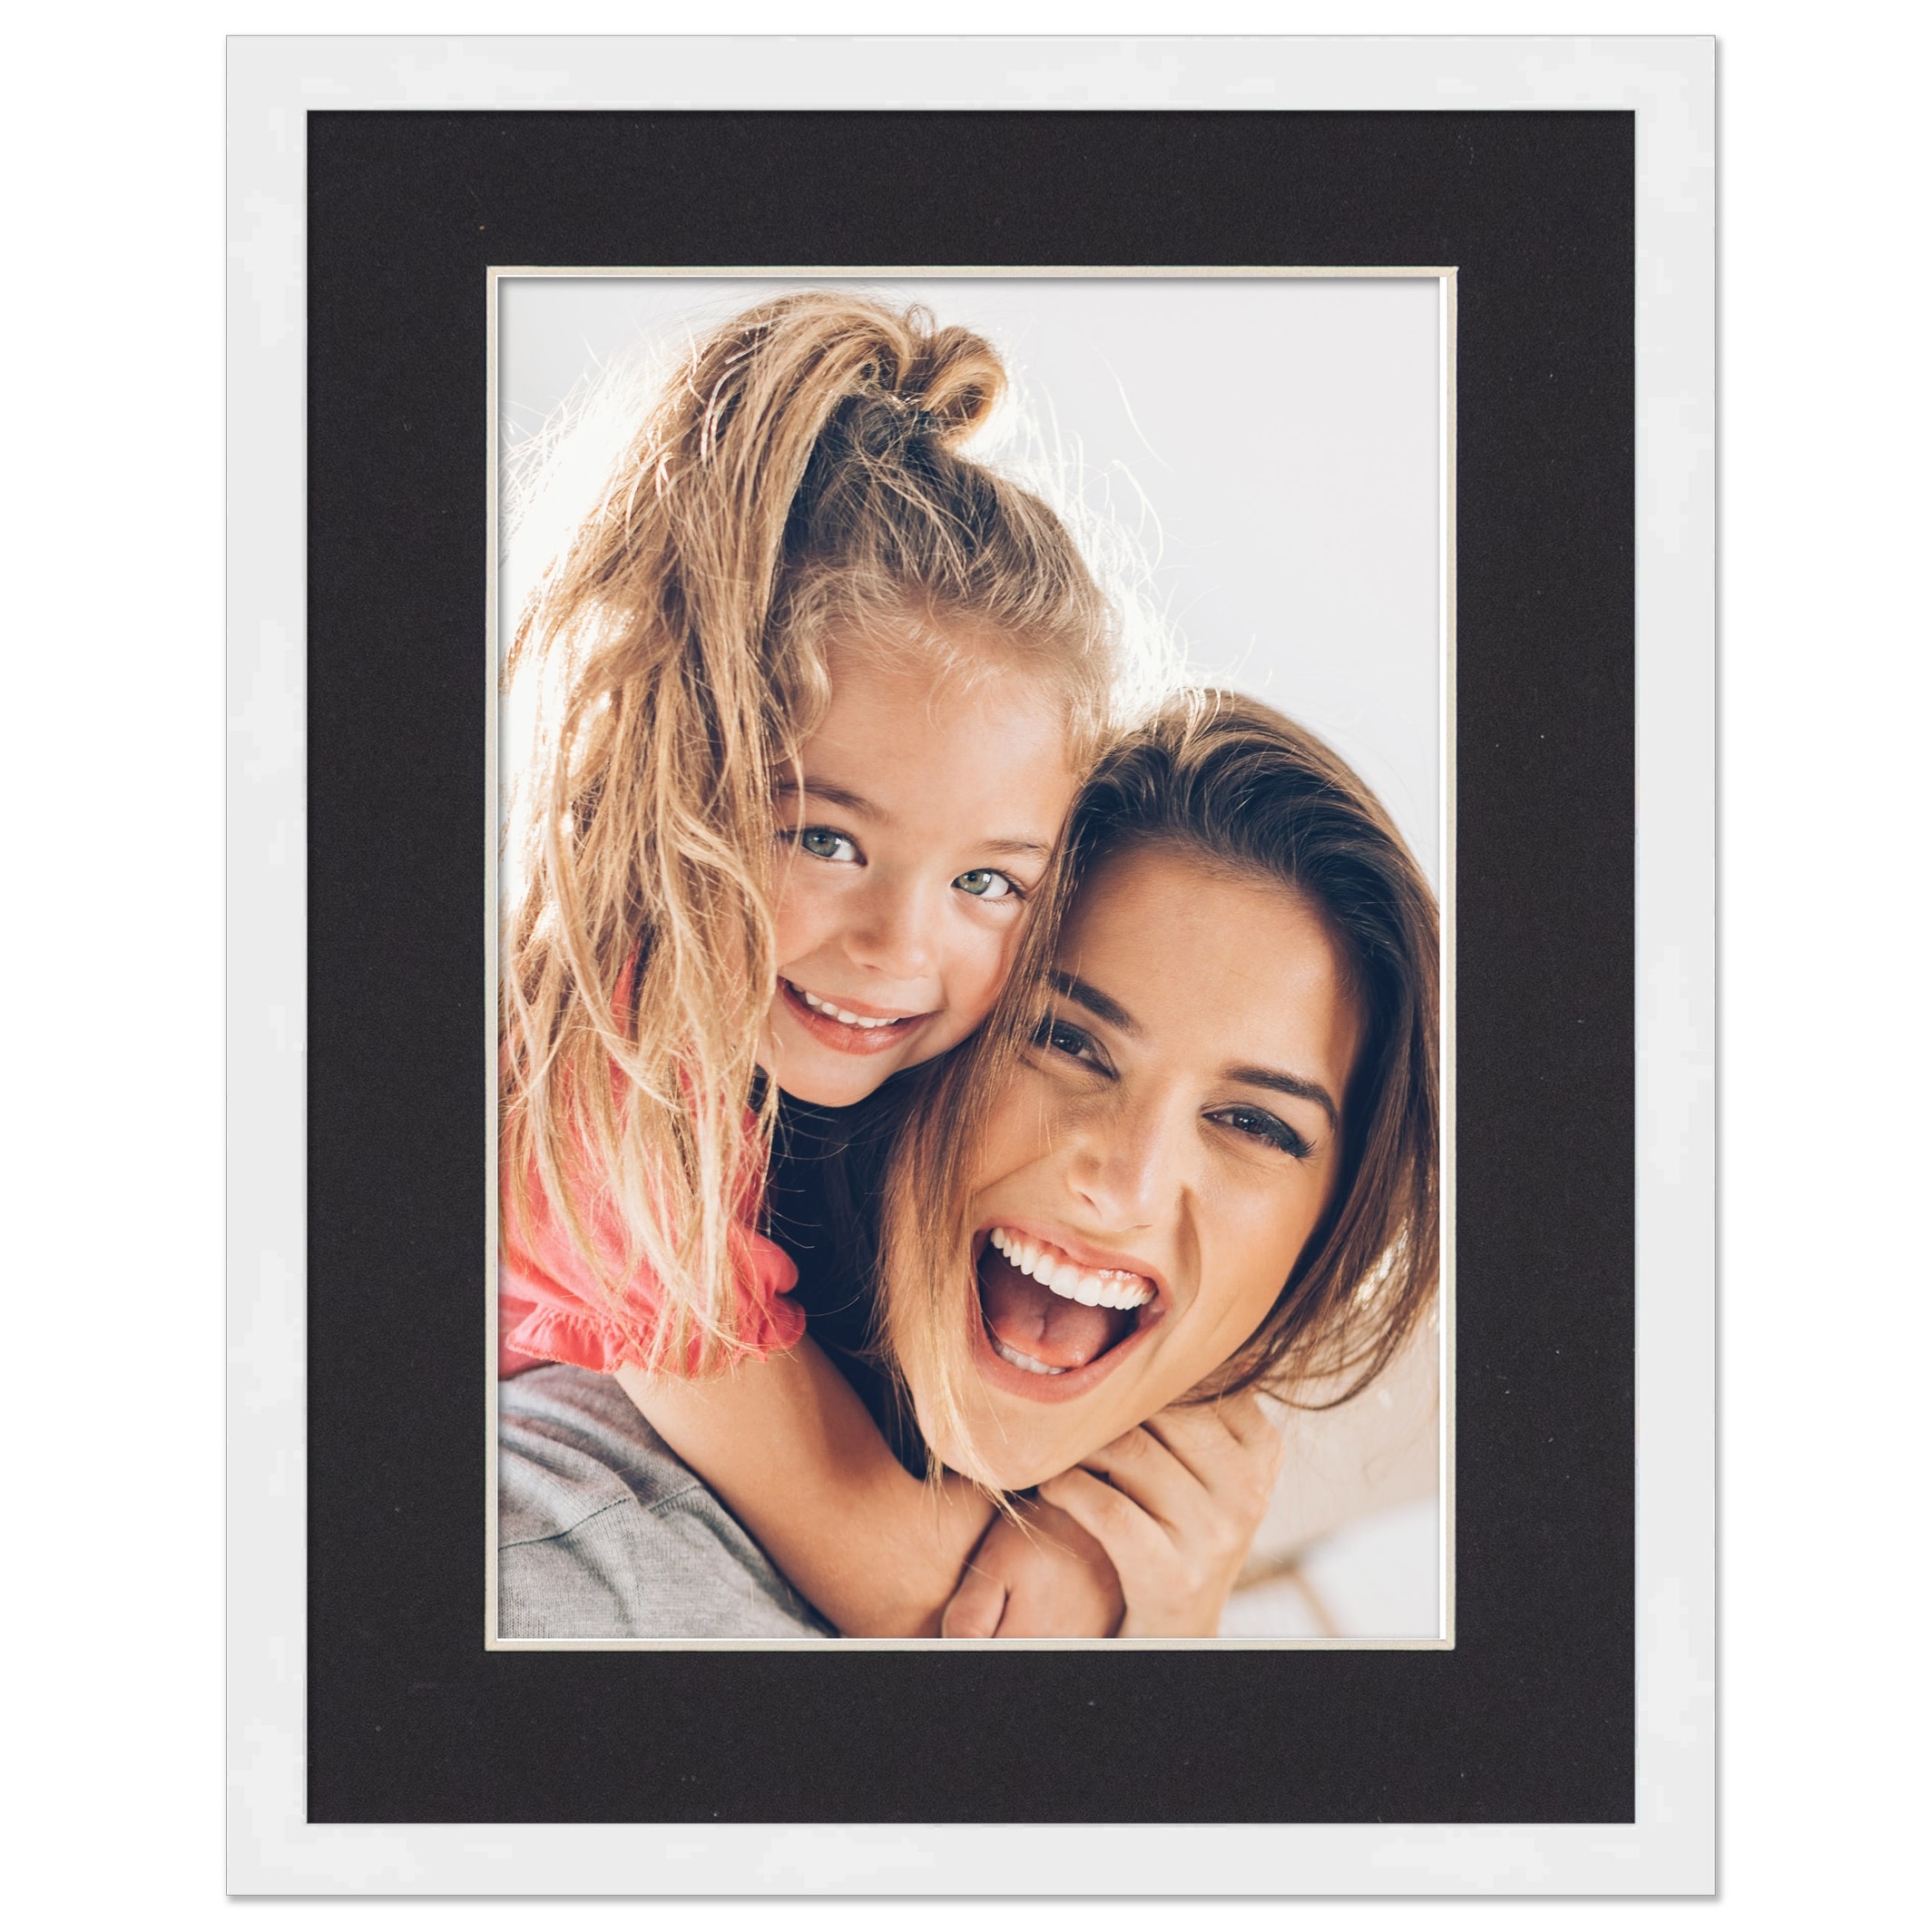  30x40 Frame with Mat - Black 32x42 Frame Wood Made to Display  Print or Poster Measuring 30 x 40 Inches with Black Photo Mat